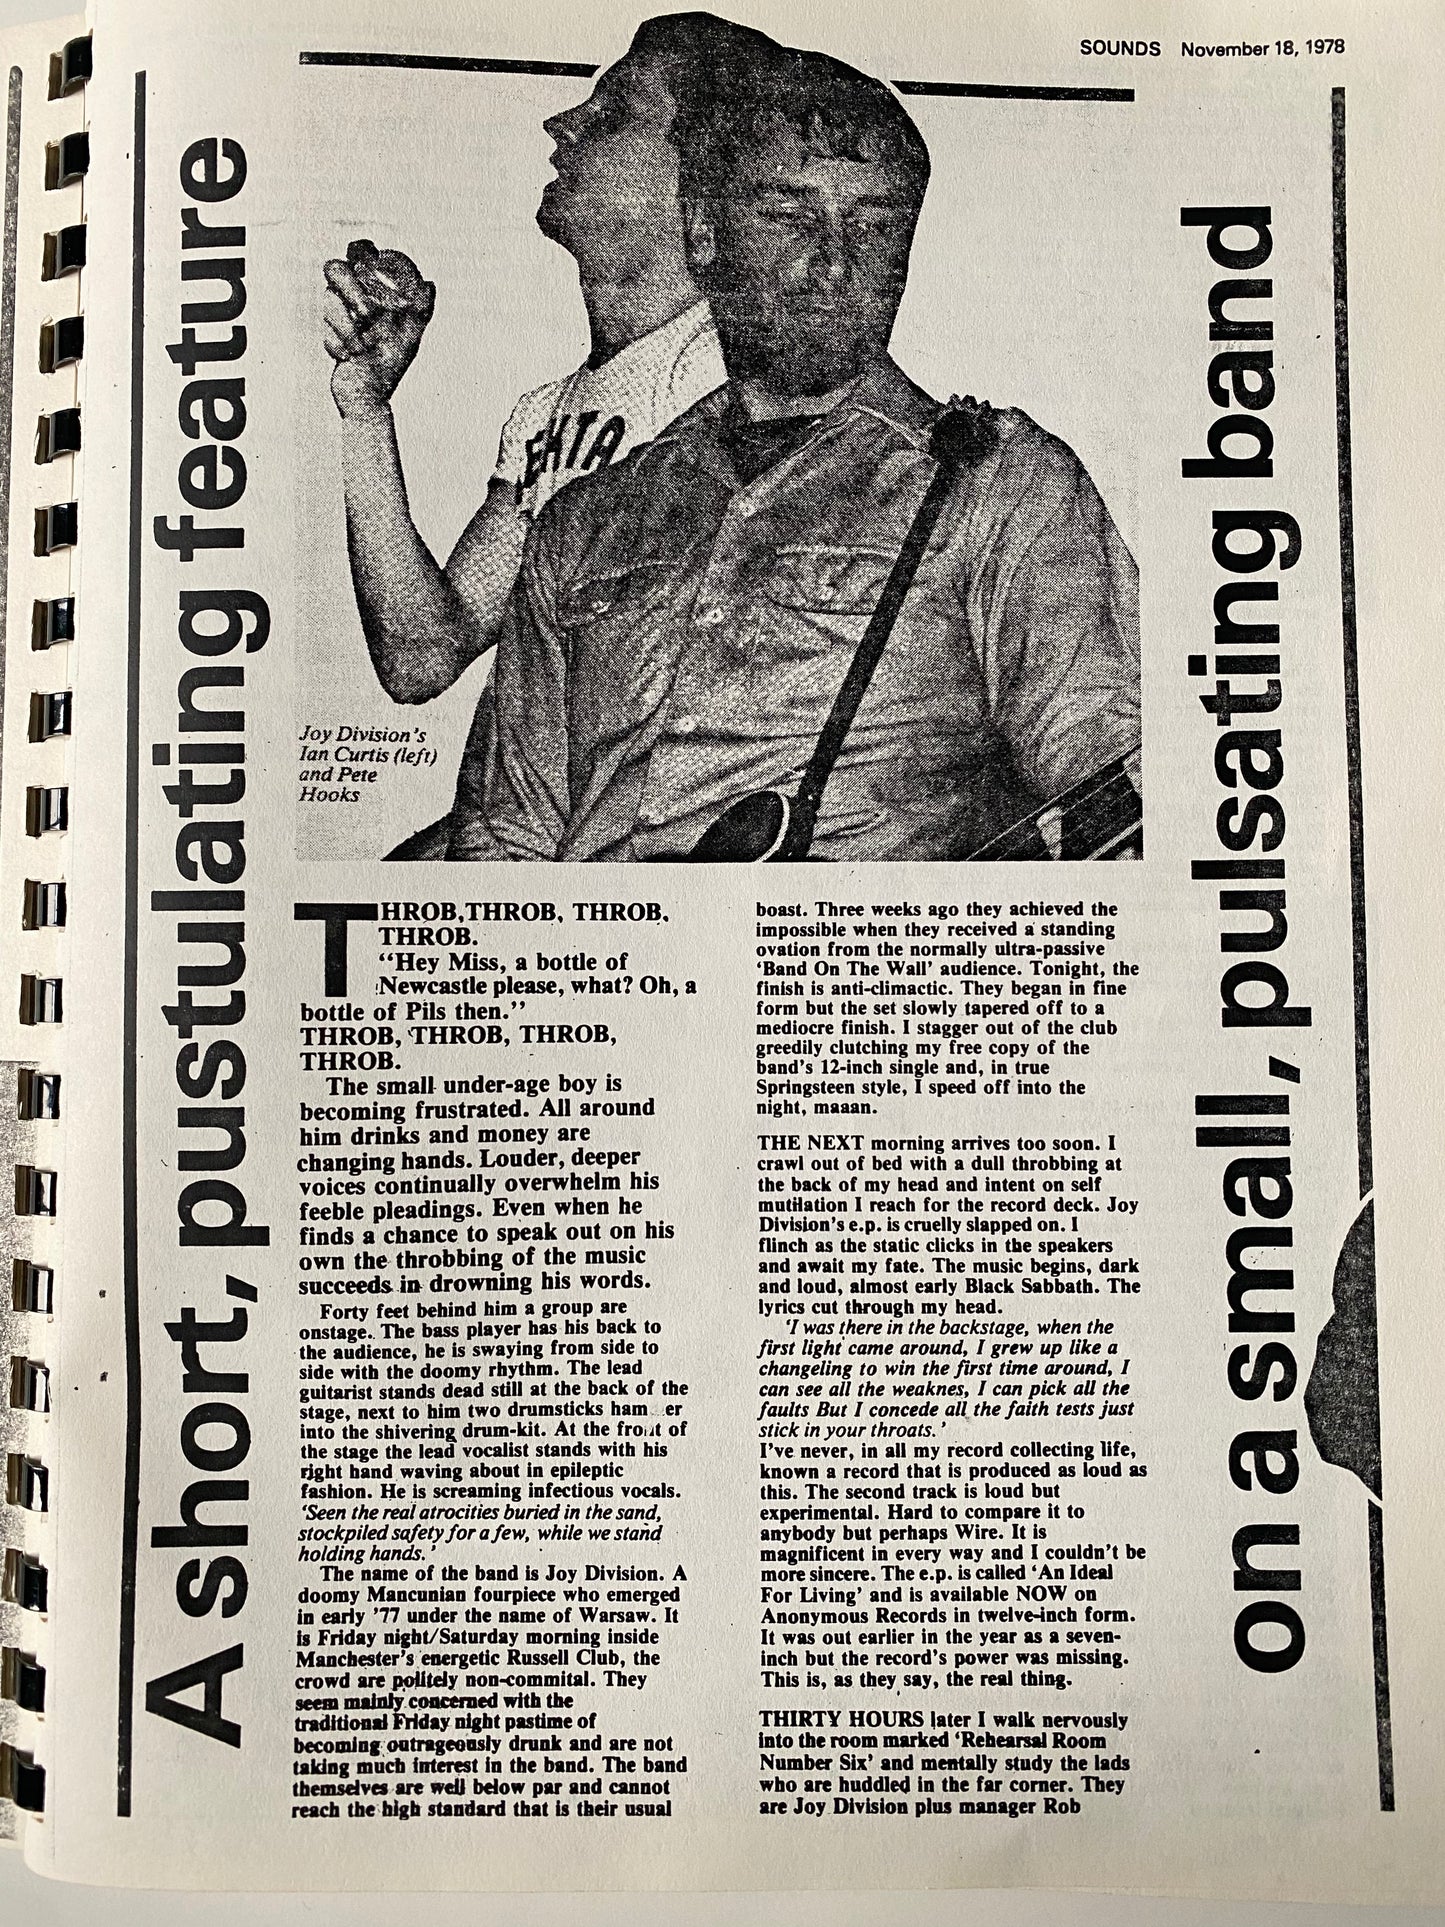 Joy Division / New Order - A History In Clippings (80s)